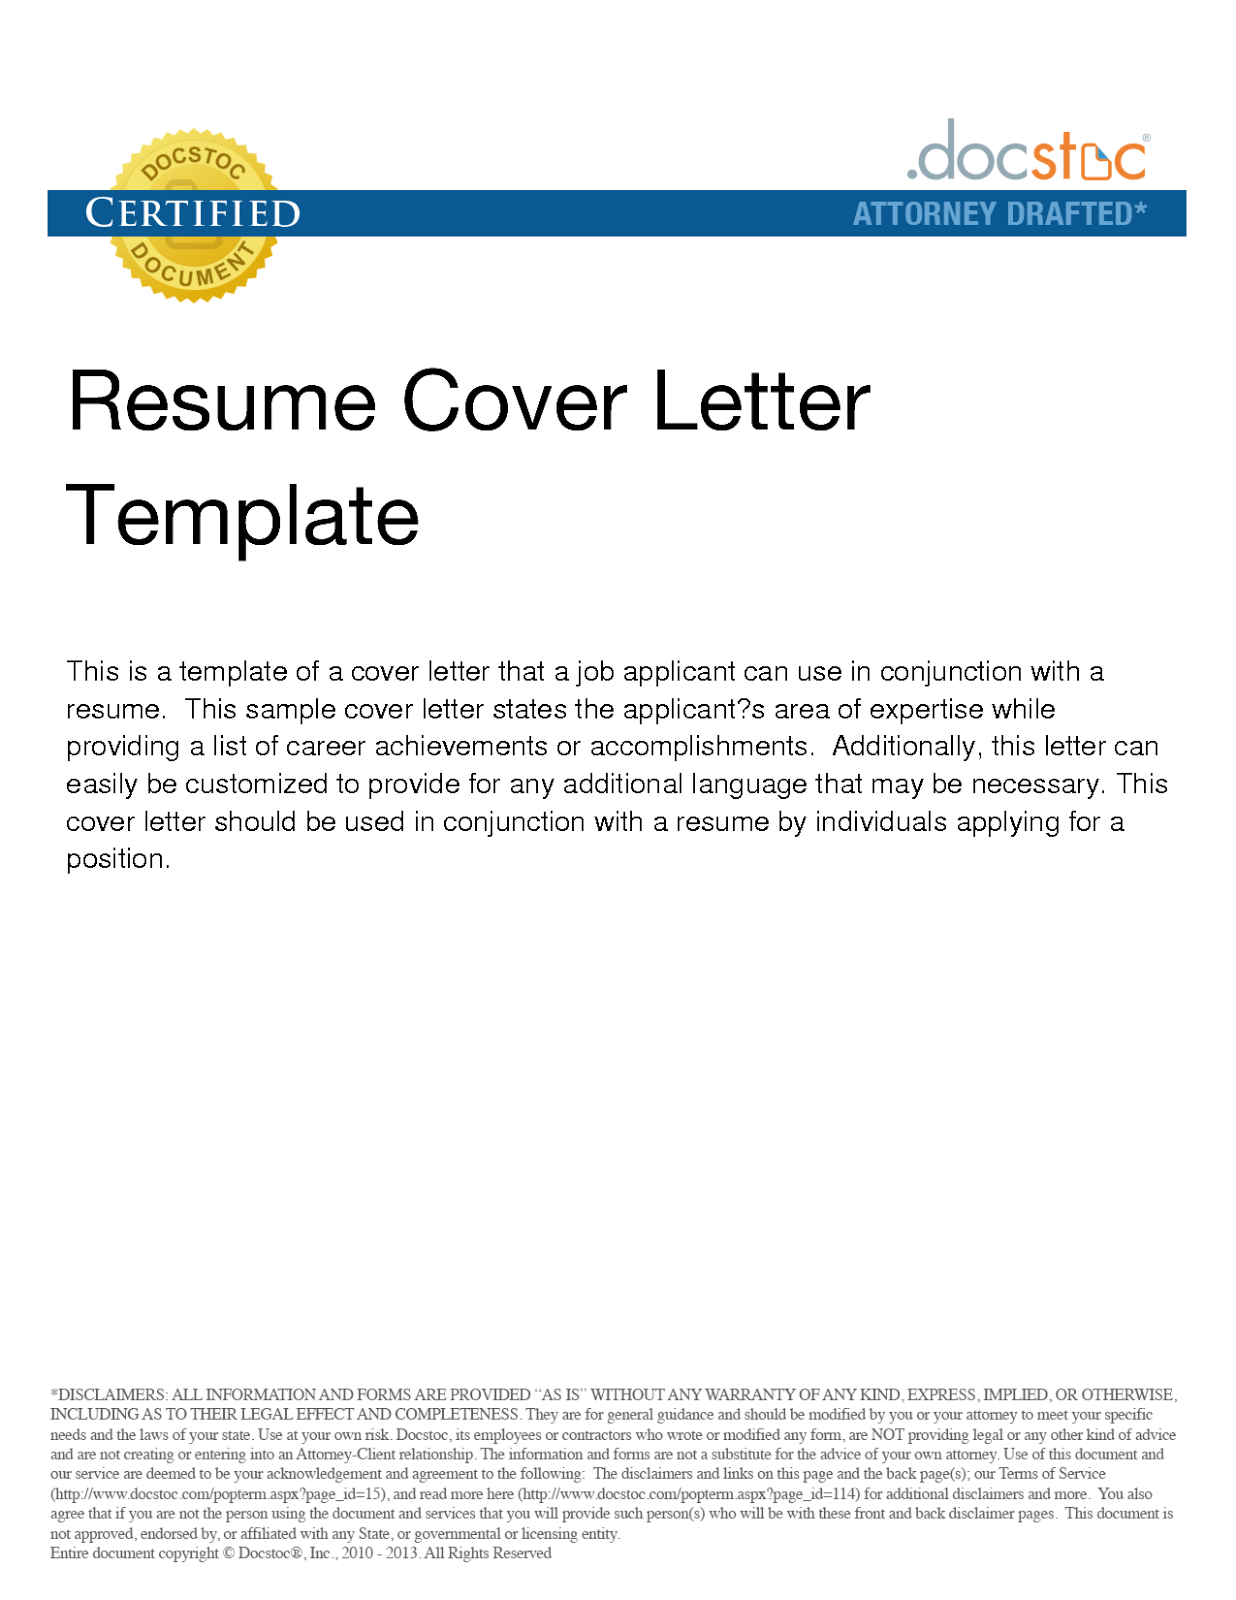 Sf424 cover letter instructions